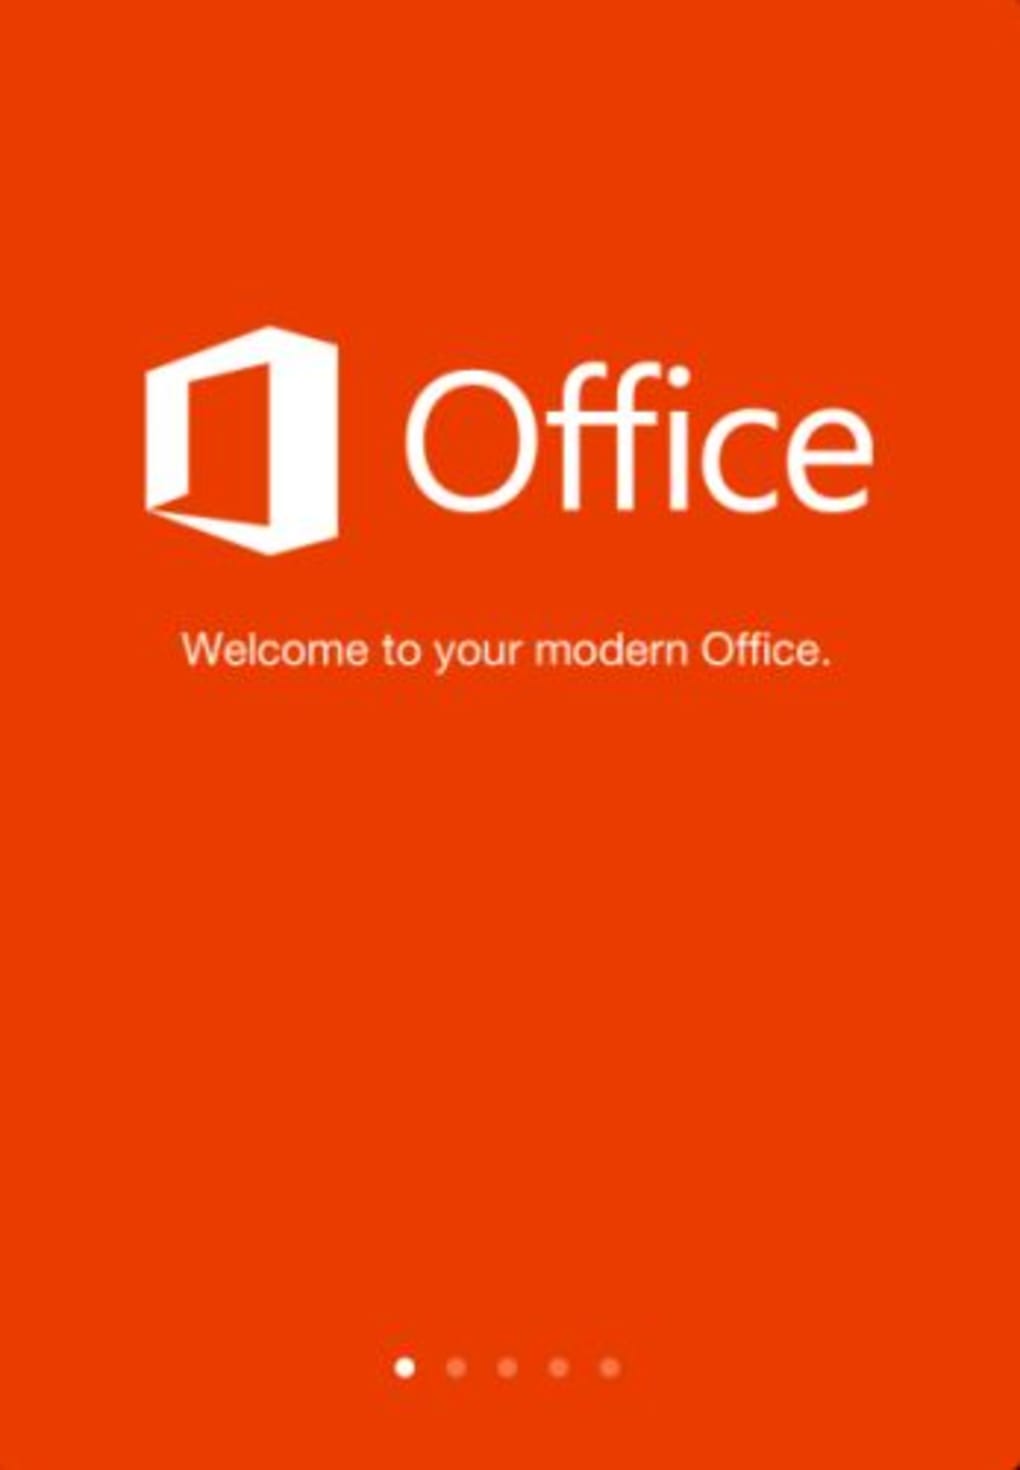 Microsoft Office for iPhone - Download